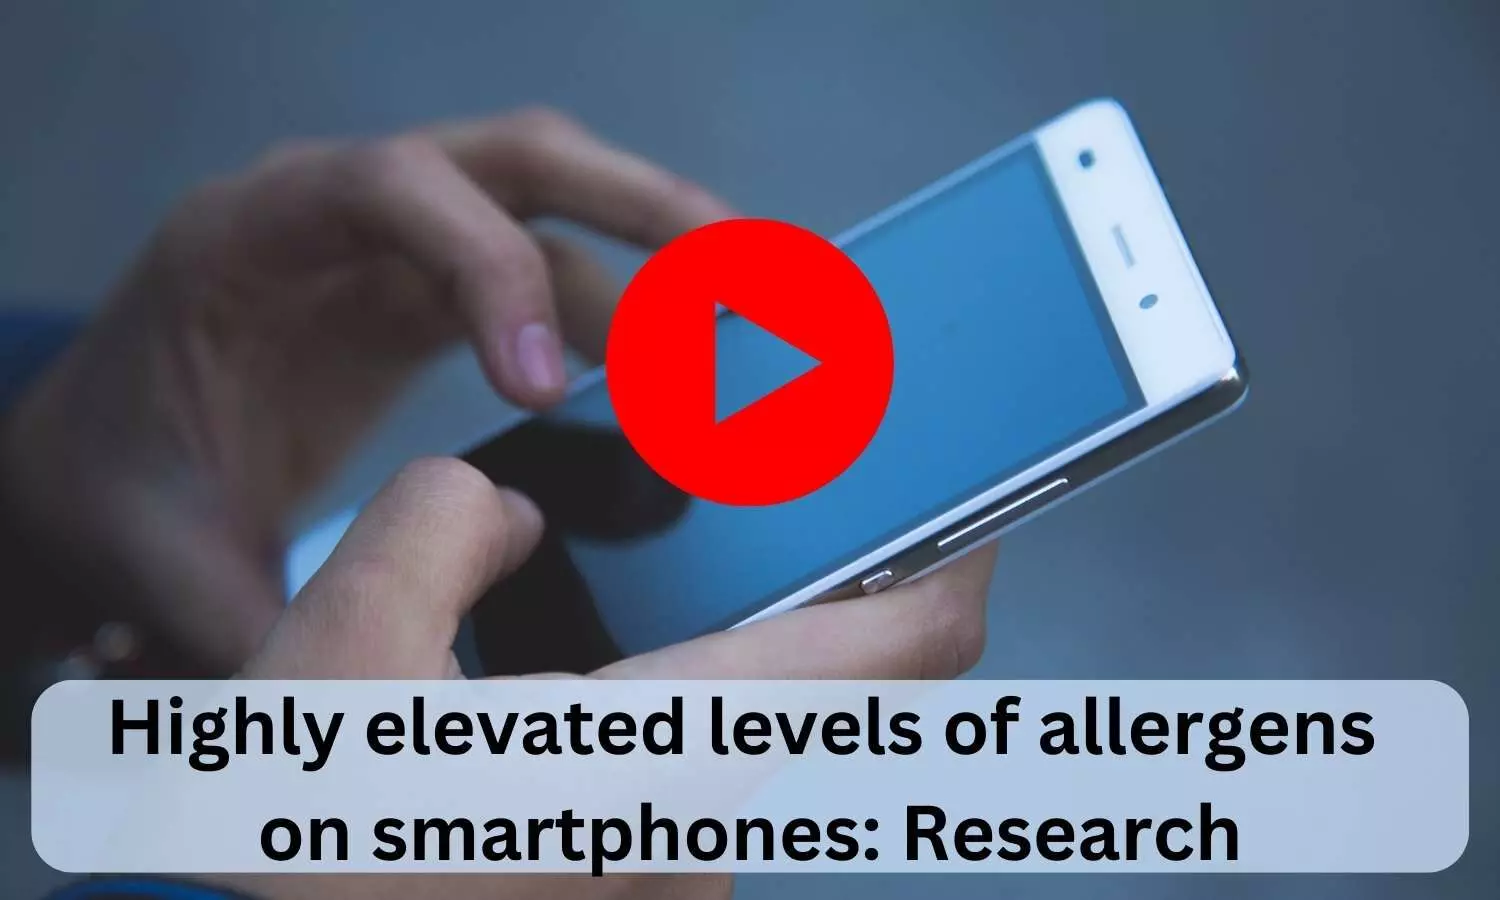 Highly elevated levels of allergens on smartphones: Research